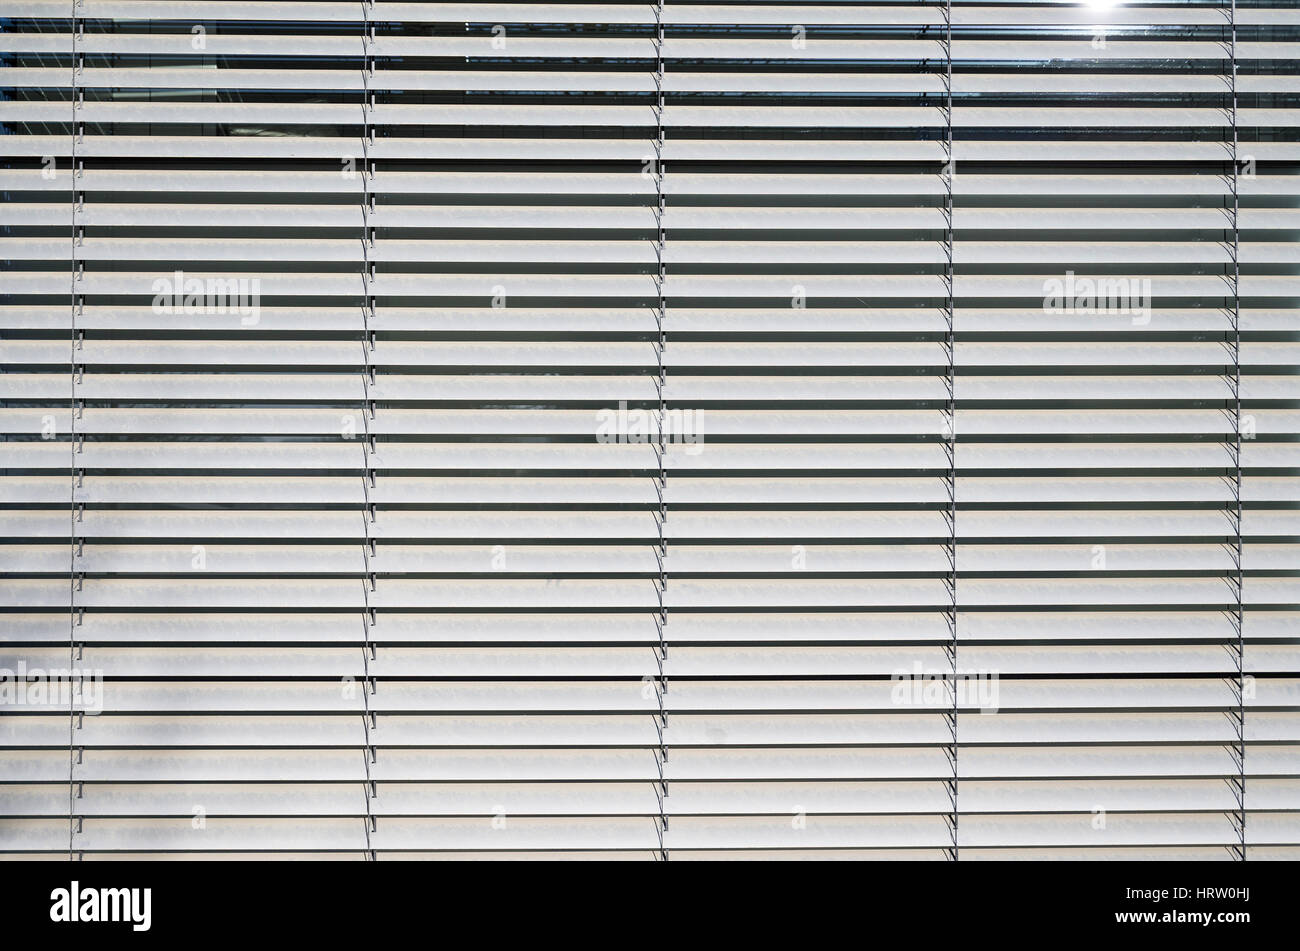 closed window blinds for background use Stock Photo